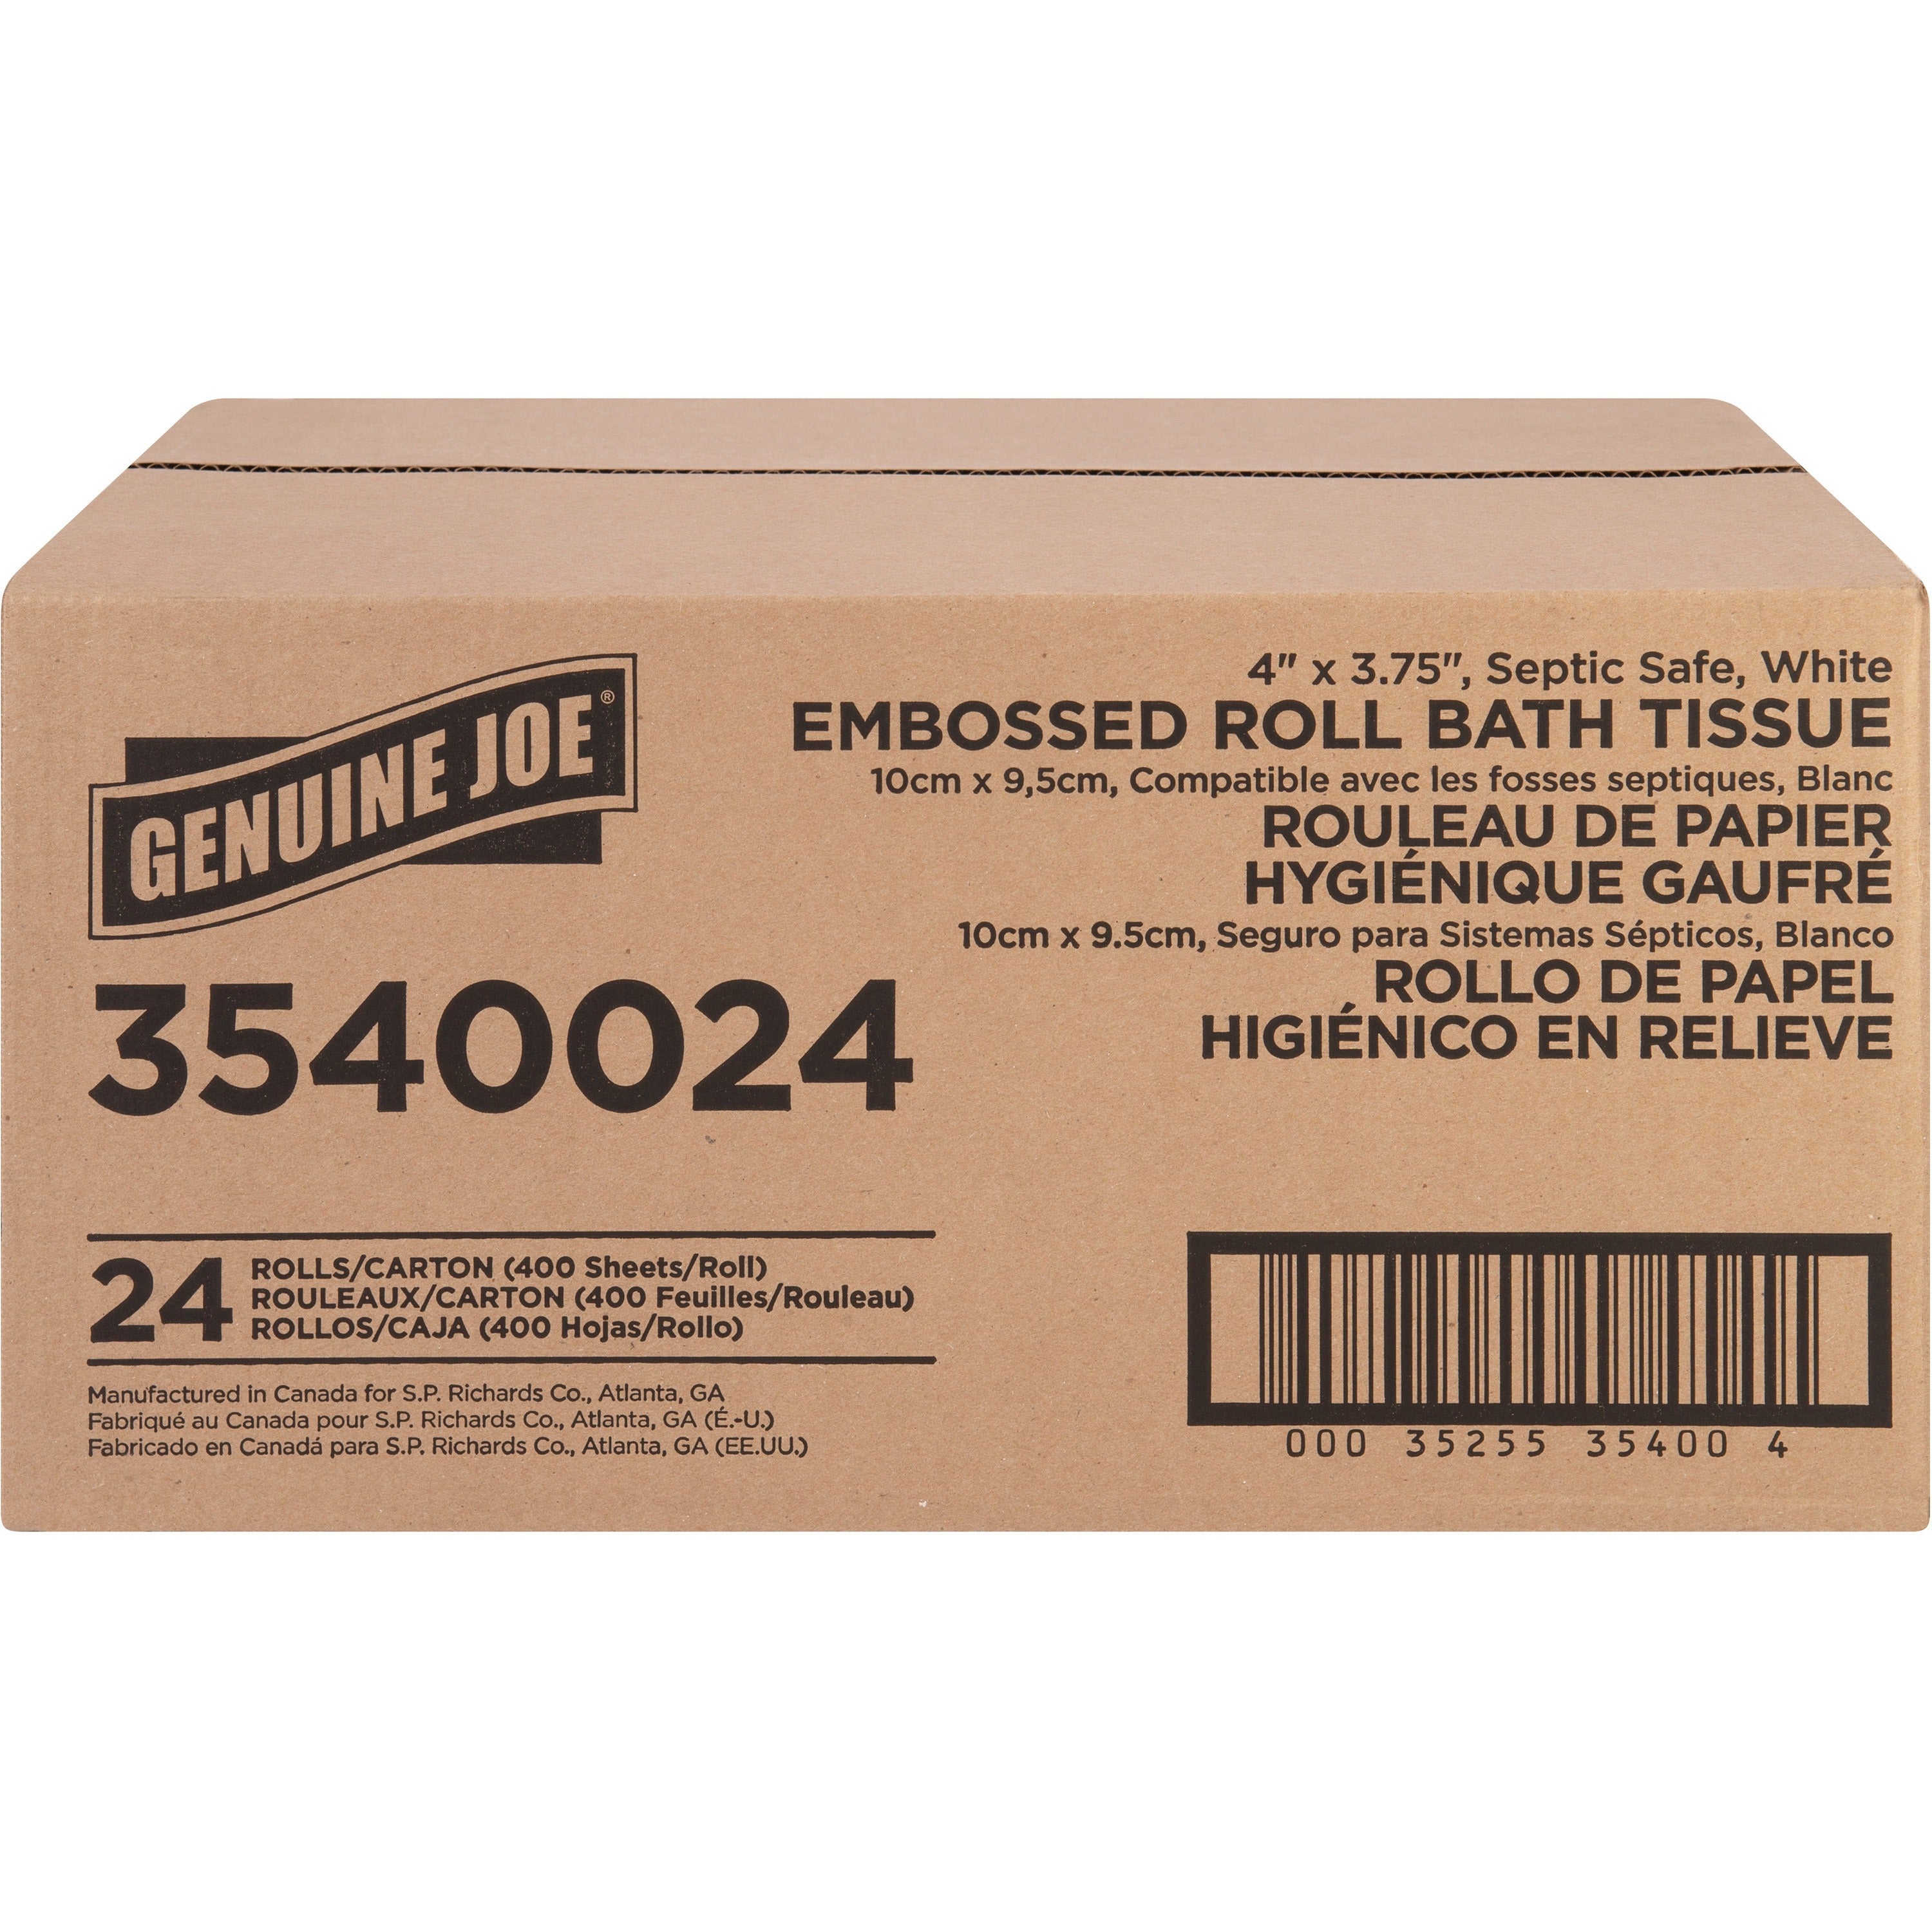 genuine-joe-2-ply-bath-tissue-rolls-2-ply-4-x-375-400-sheets-roll-white-perforated-absorbent-soft-sewer-safe-septic-safe-for-bathroom-restroom-24-carton_gjo3540024 - 2